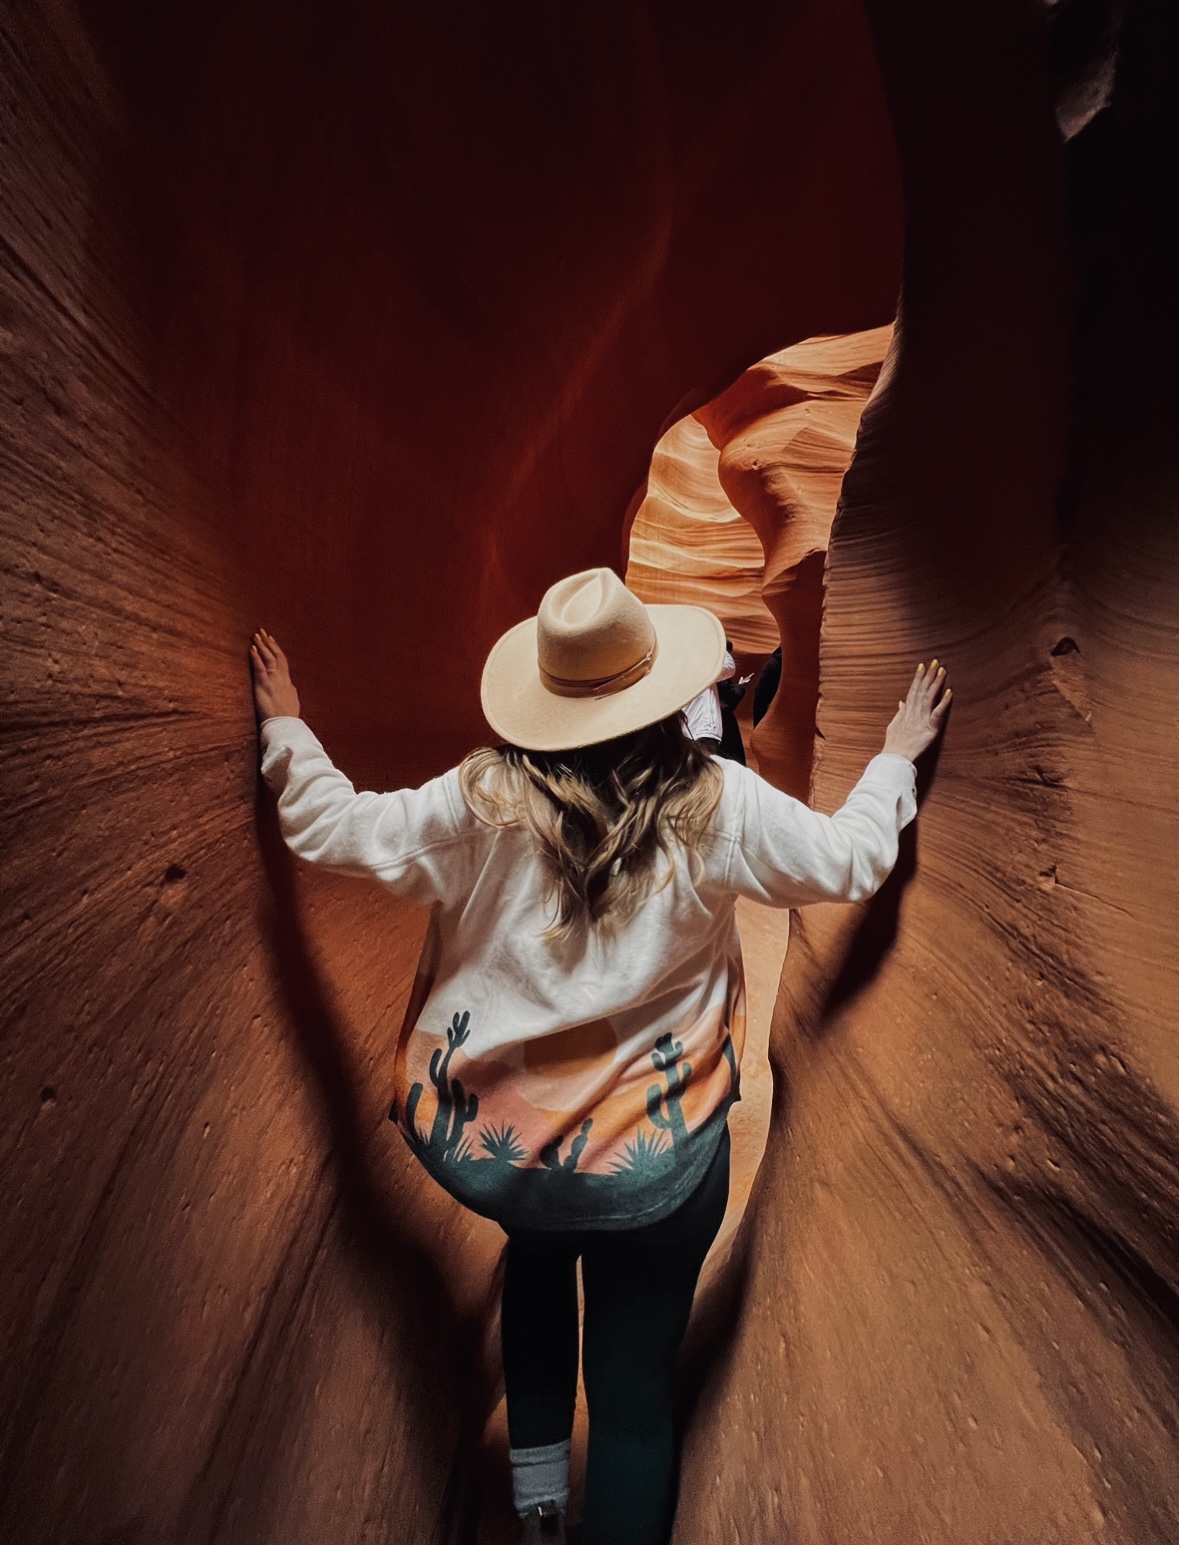 Girl in a Jacket and Wide Hat in an Orange Slot Canyon